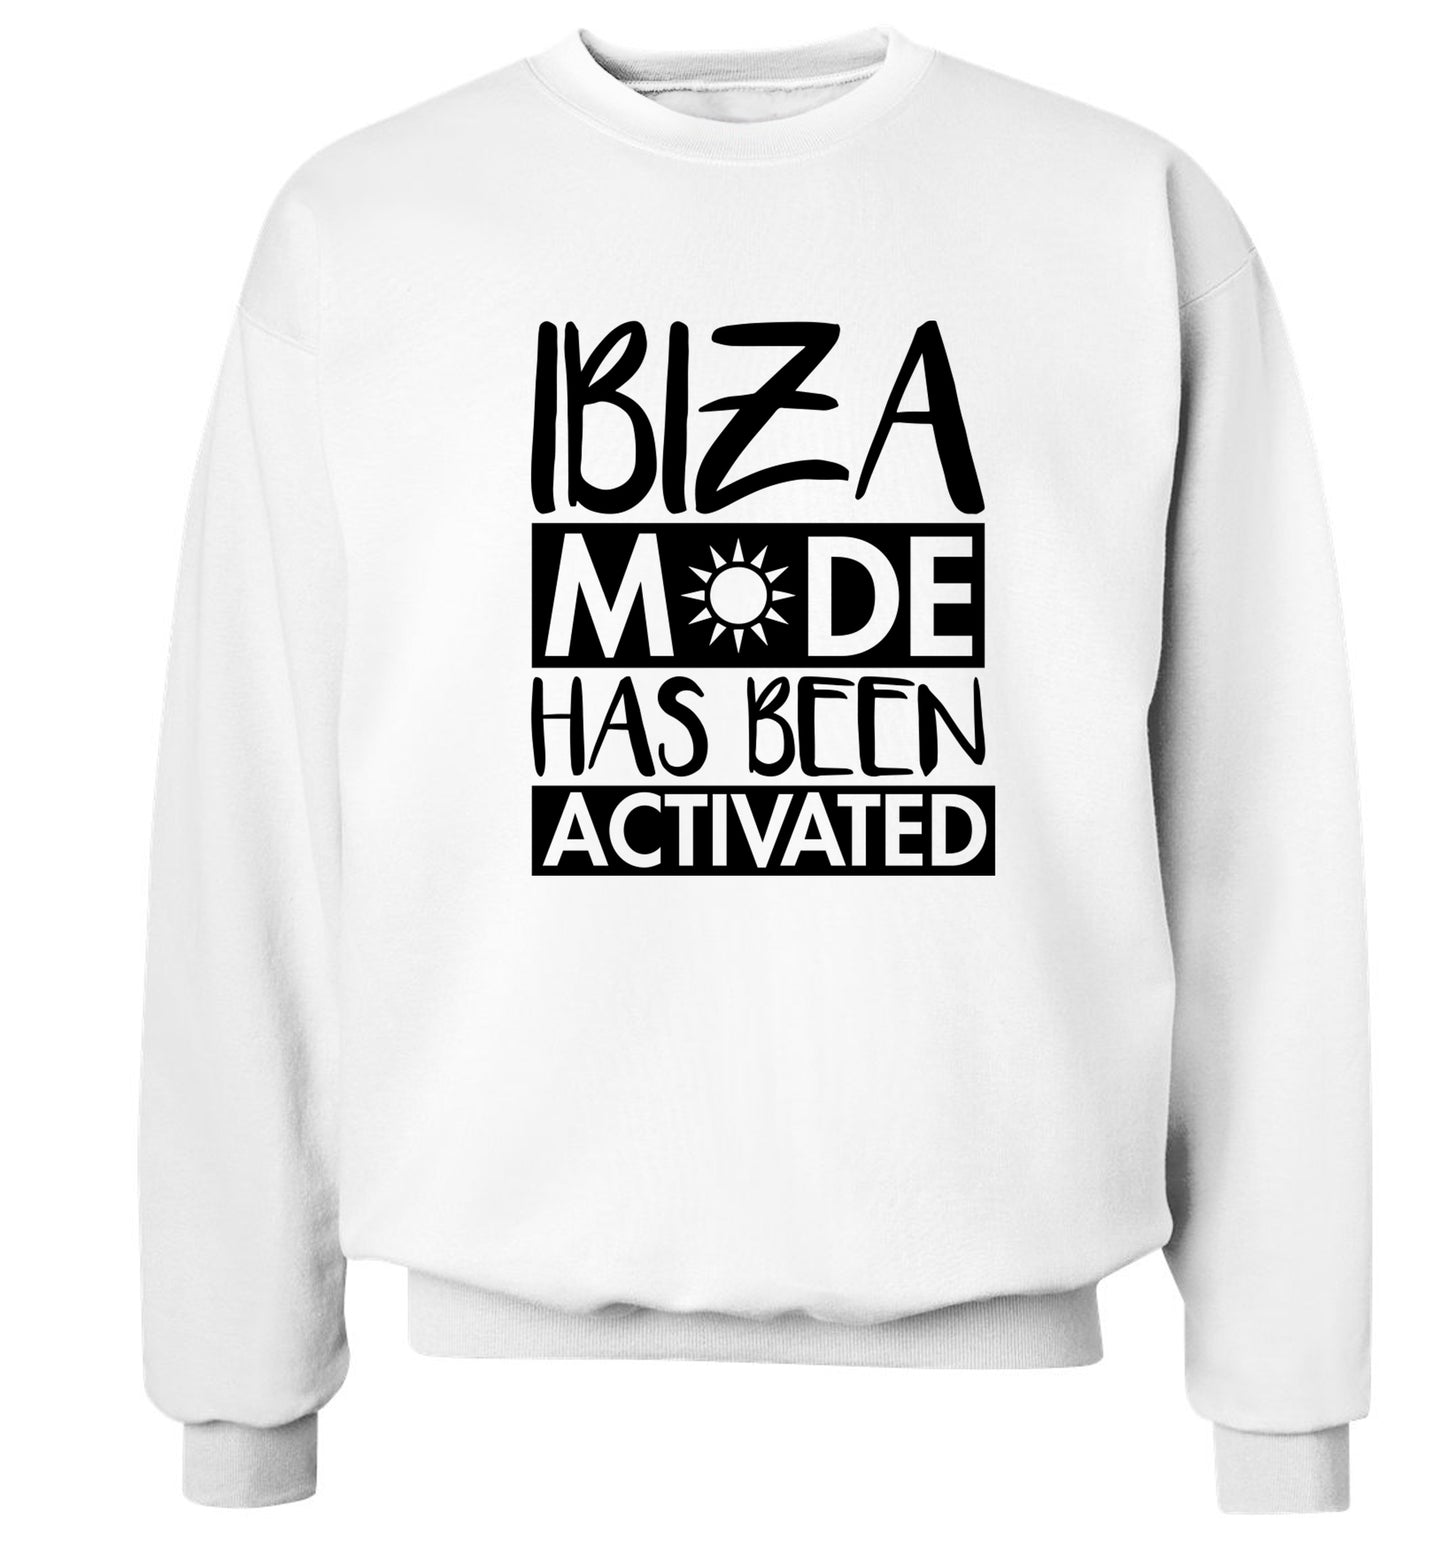 Ibiza mode has been activated Adult's unisex white Sweater 2XL